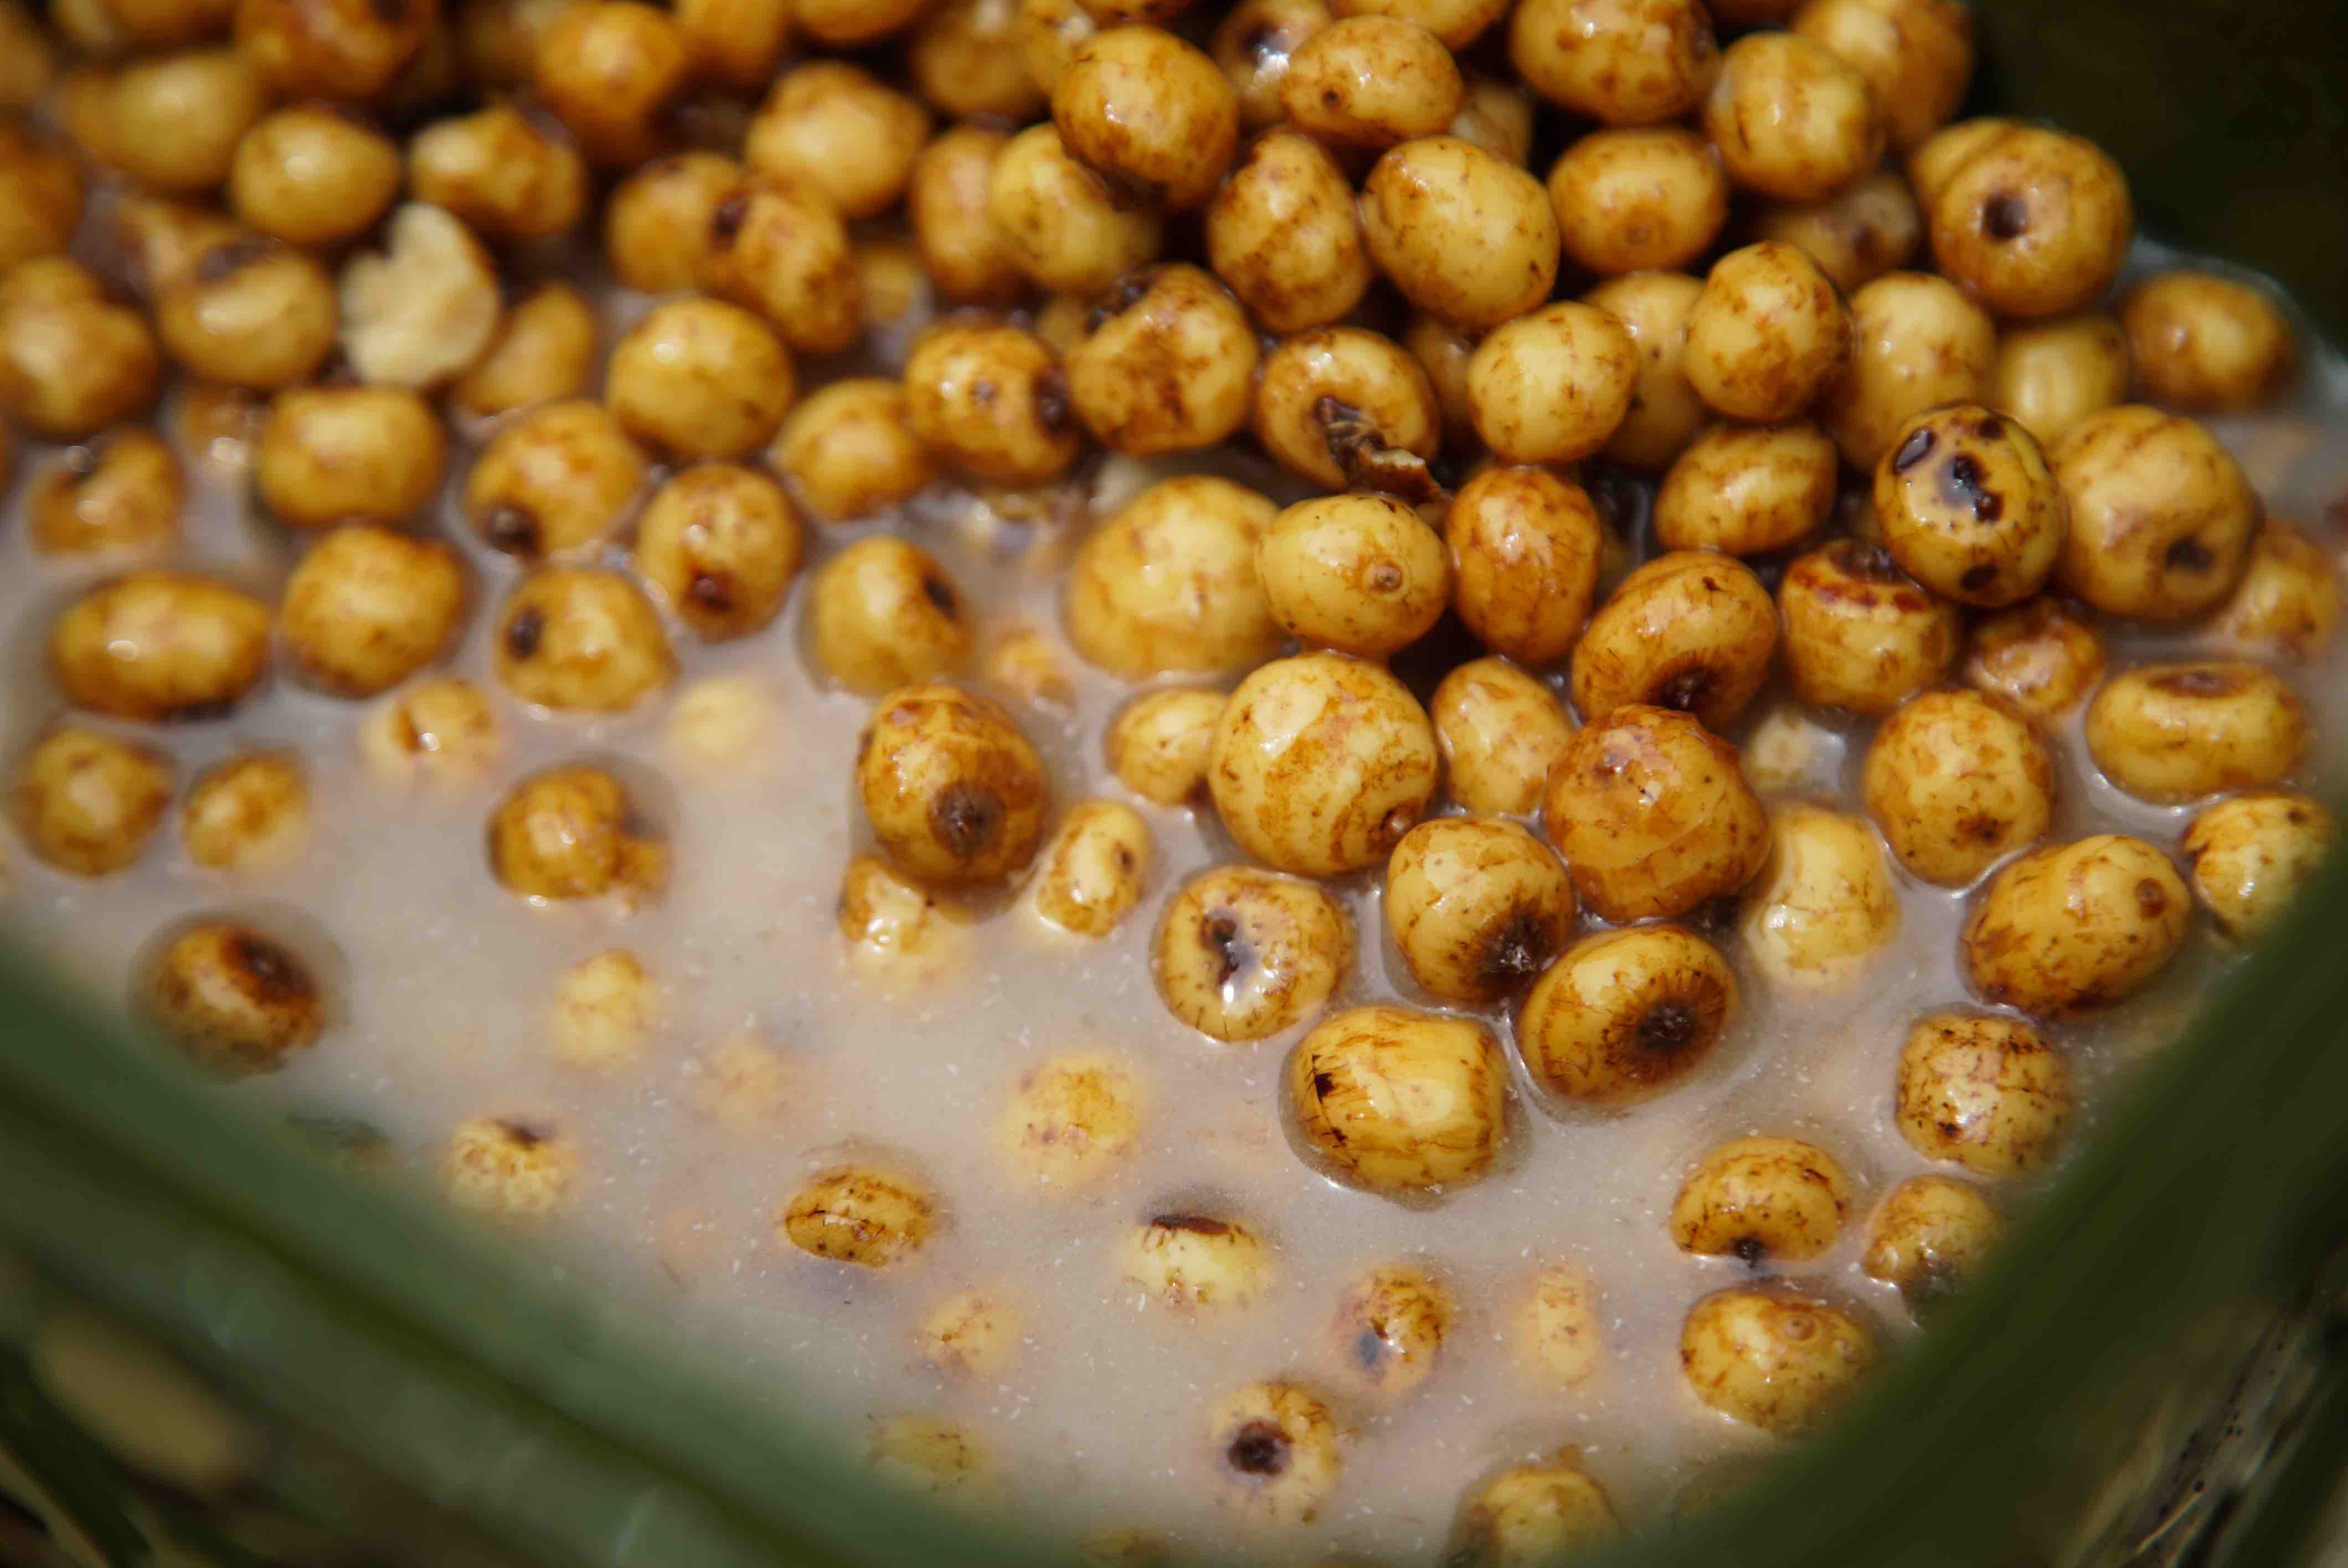 How To Prepare Tiger Nuts - Gilly